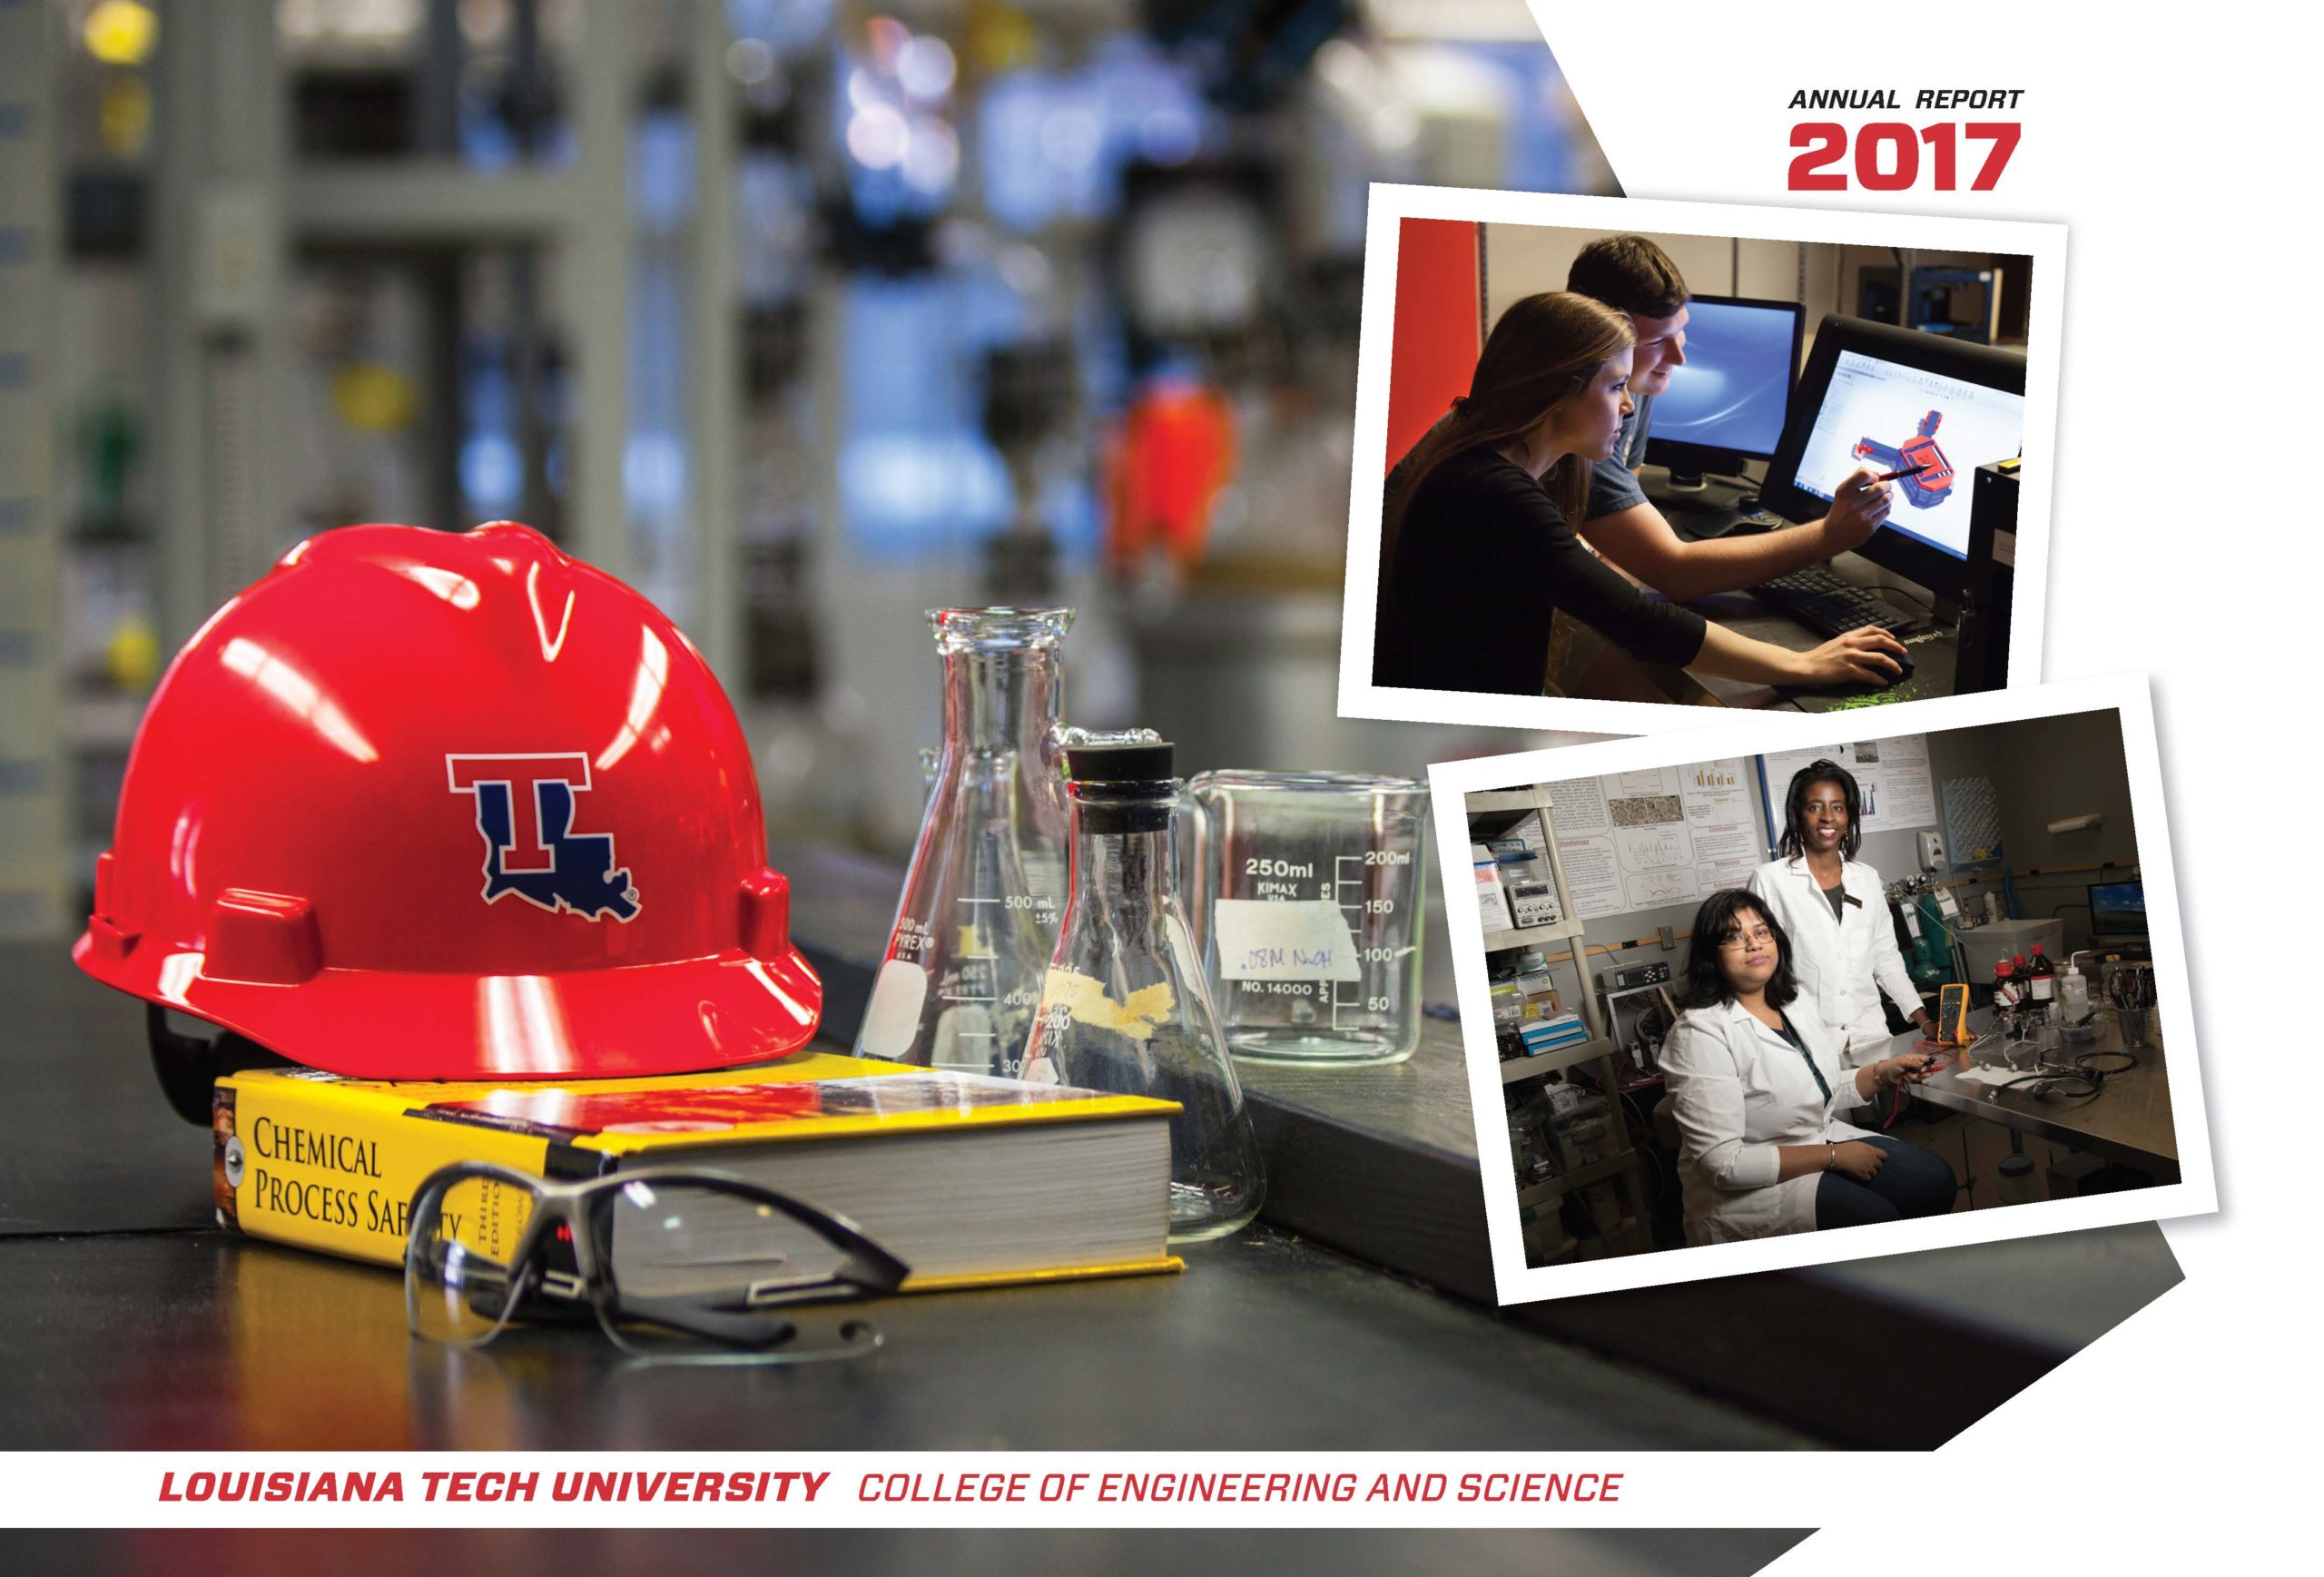 Louisiana Tech University College of Engineering and Science Annual Report 2017